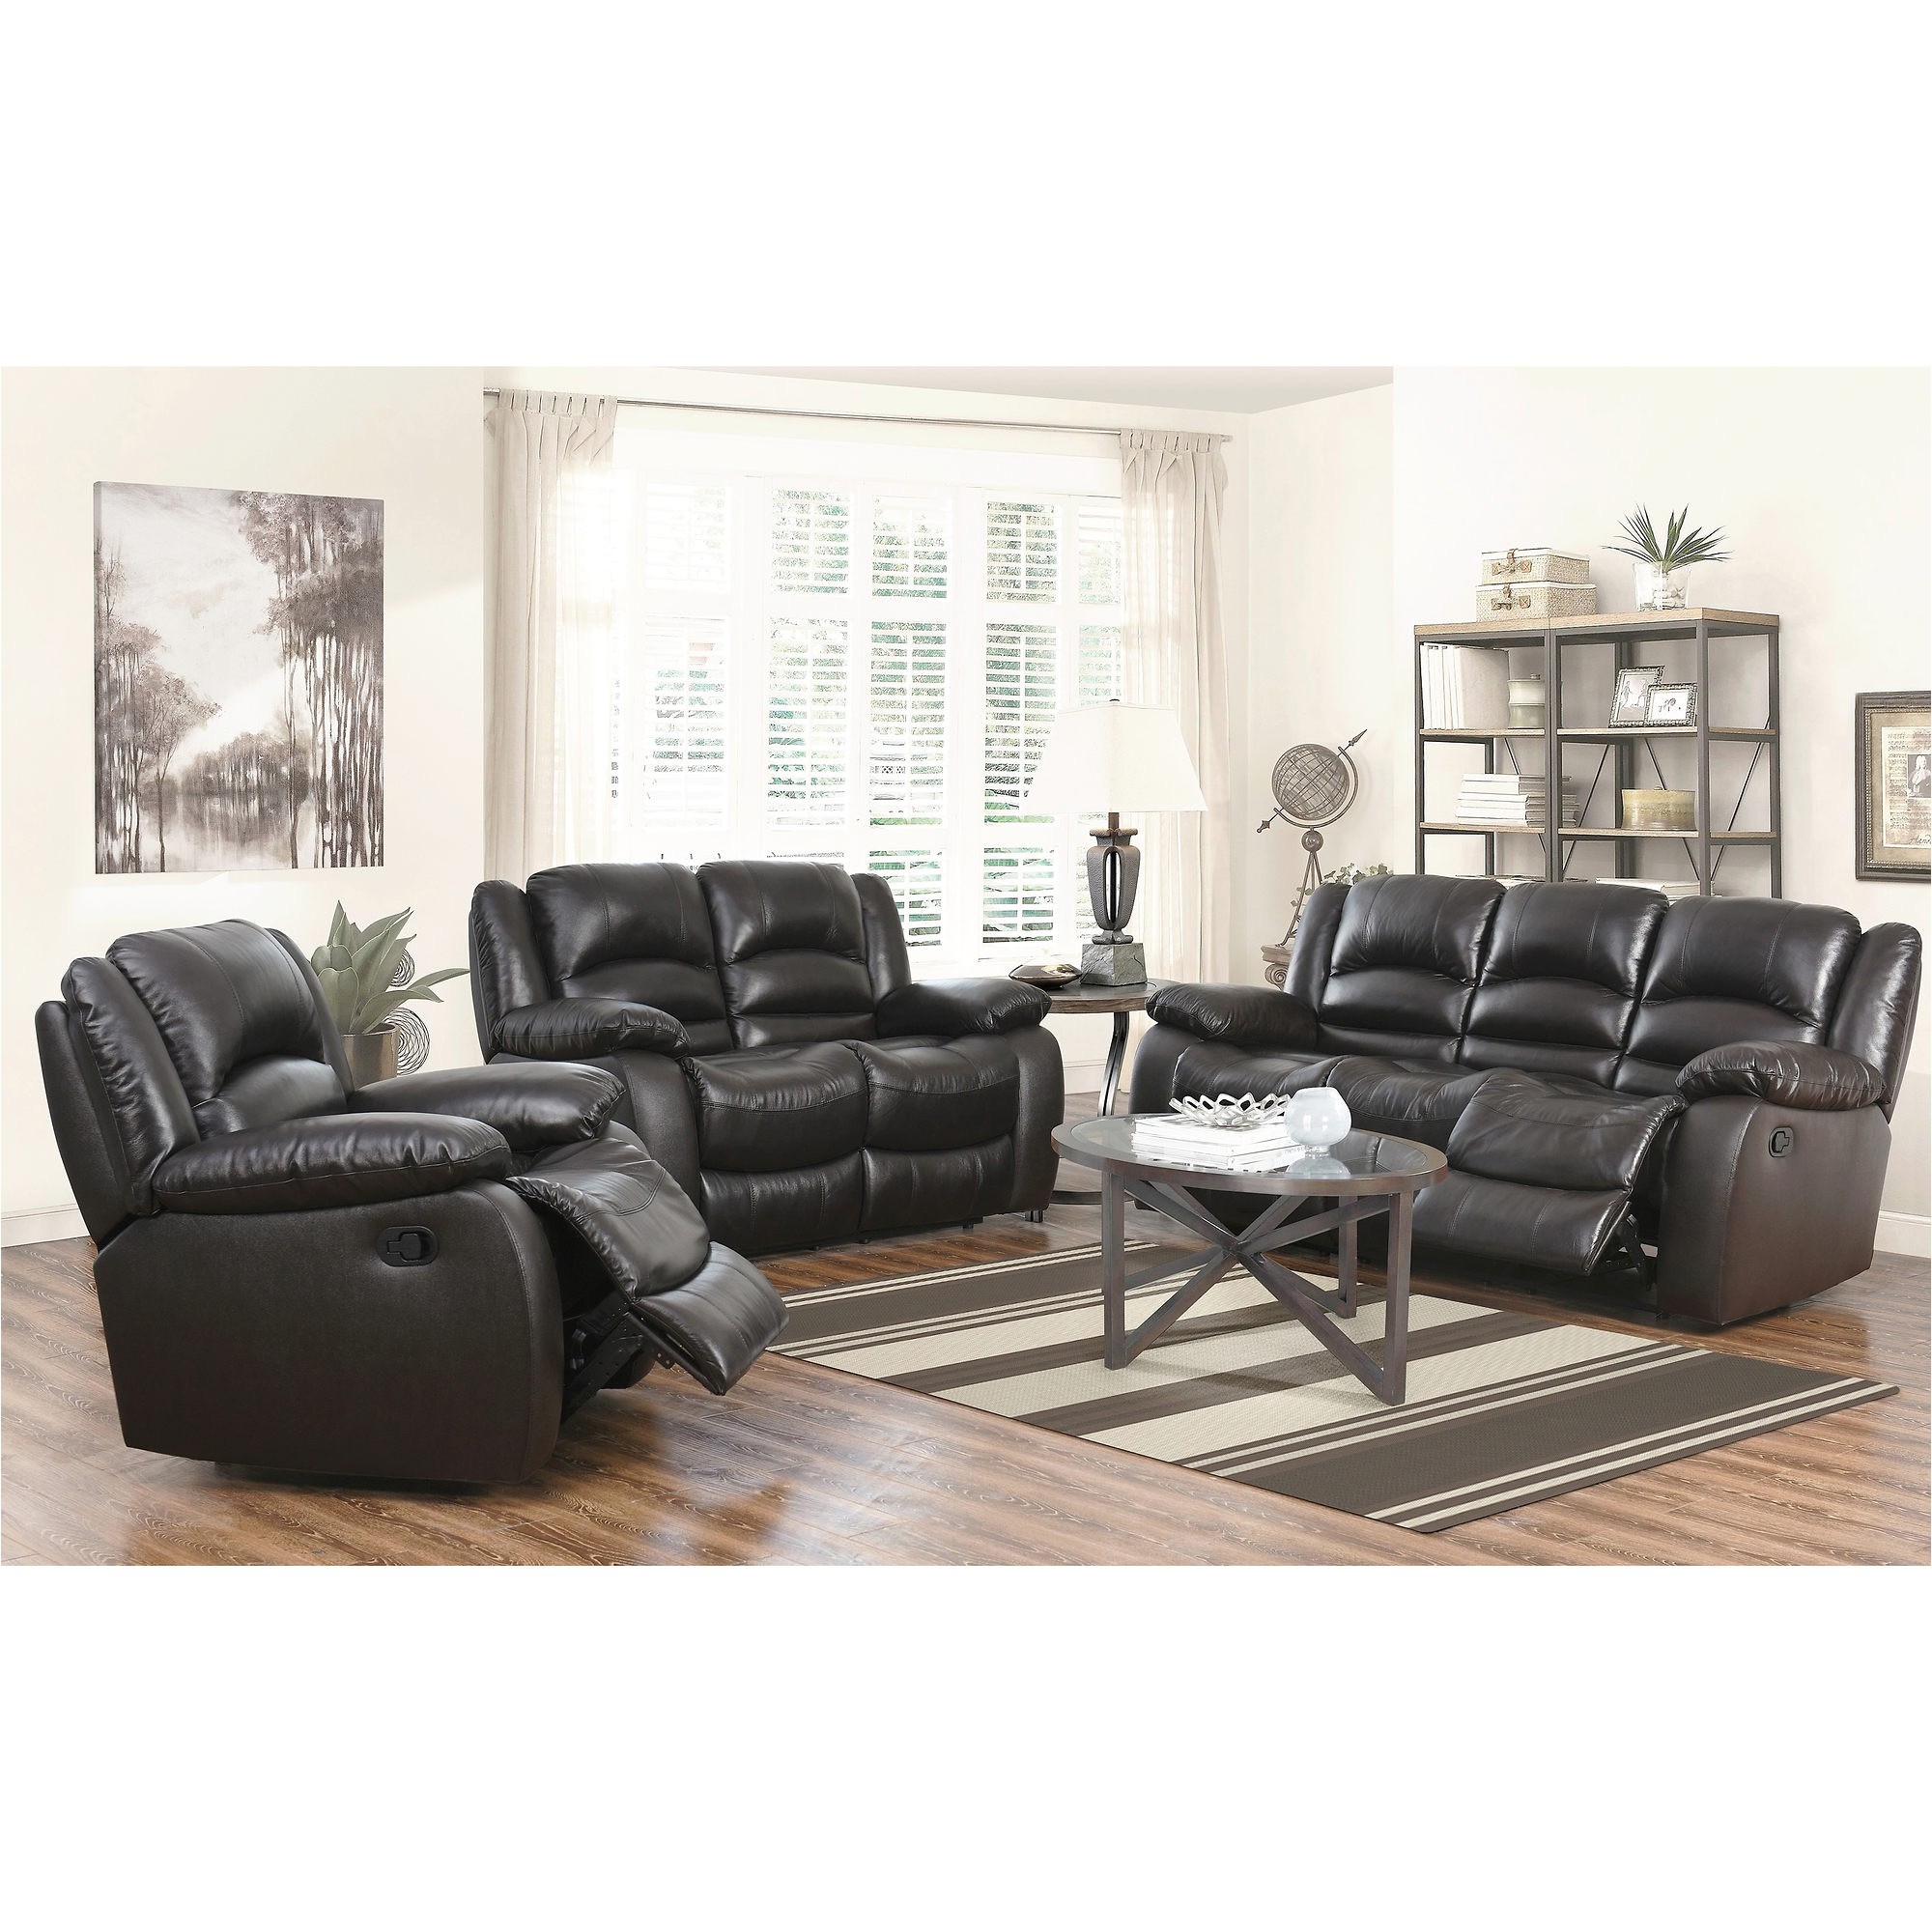 Bjs sofa Recliner Faux Leather Reclining sofa Lovely Bjs wholesale Club Product